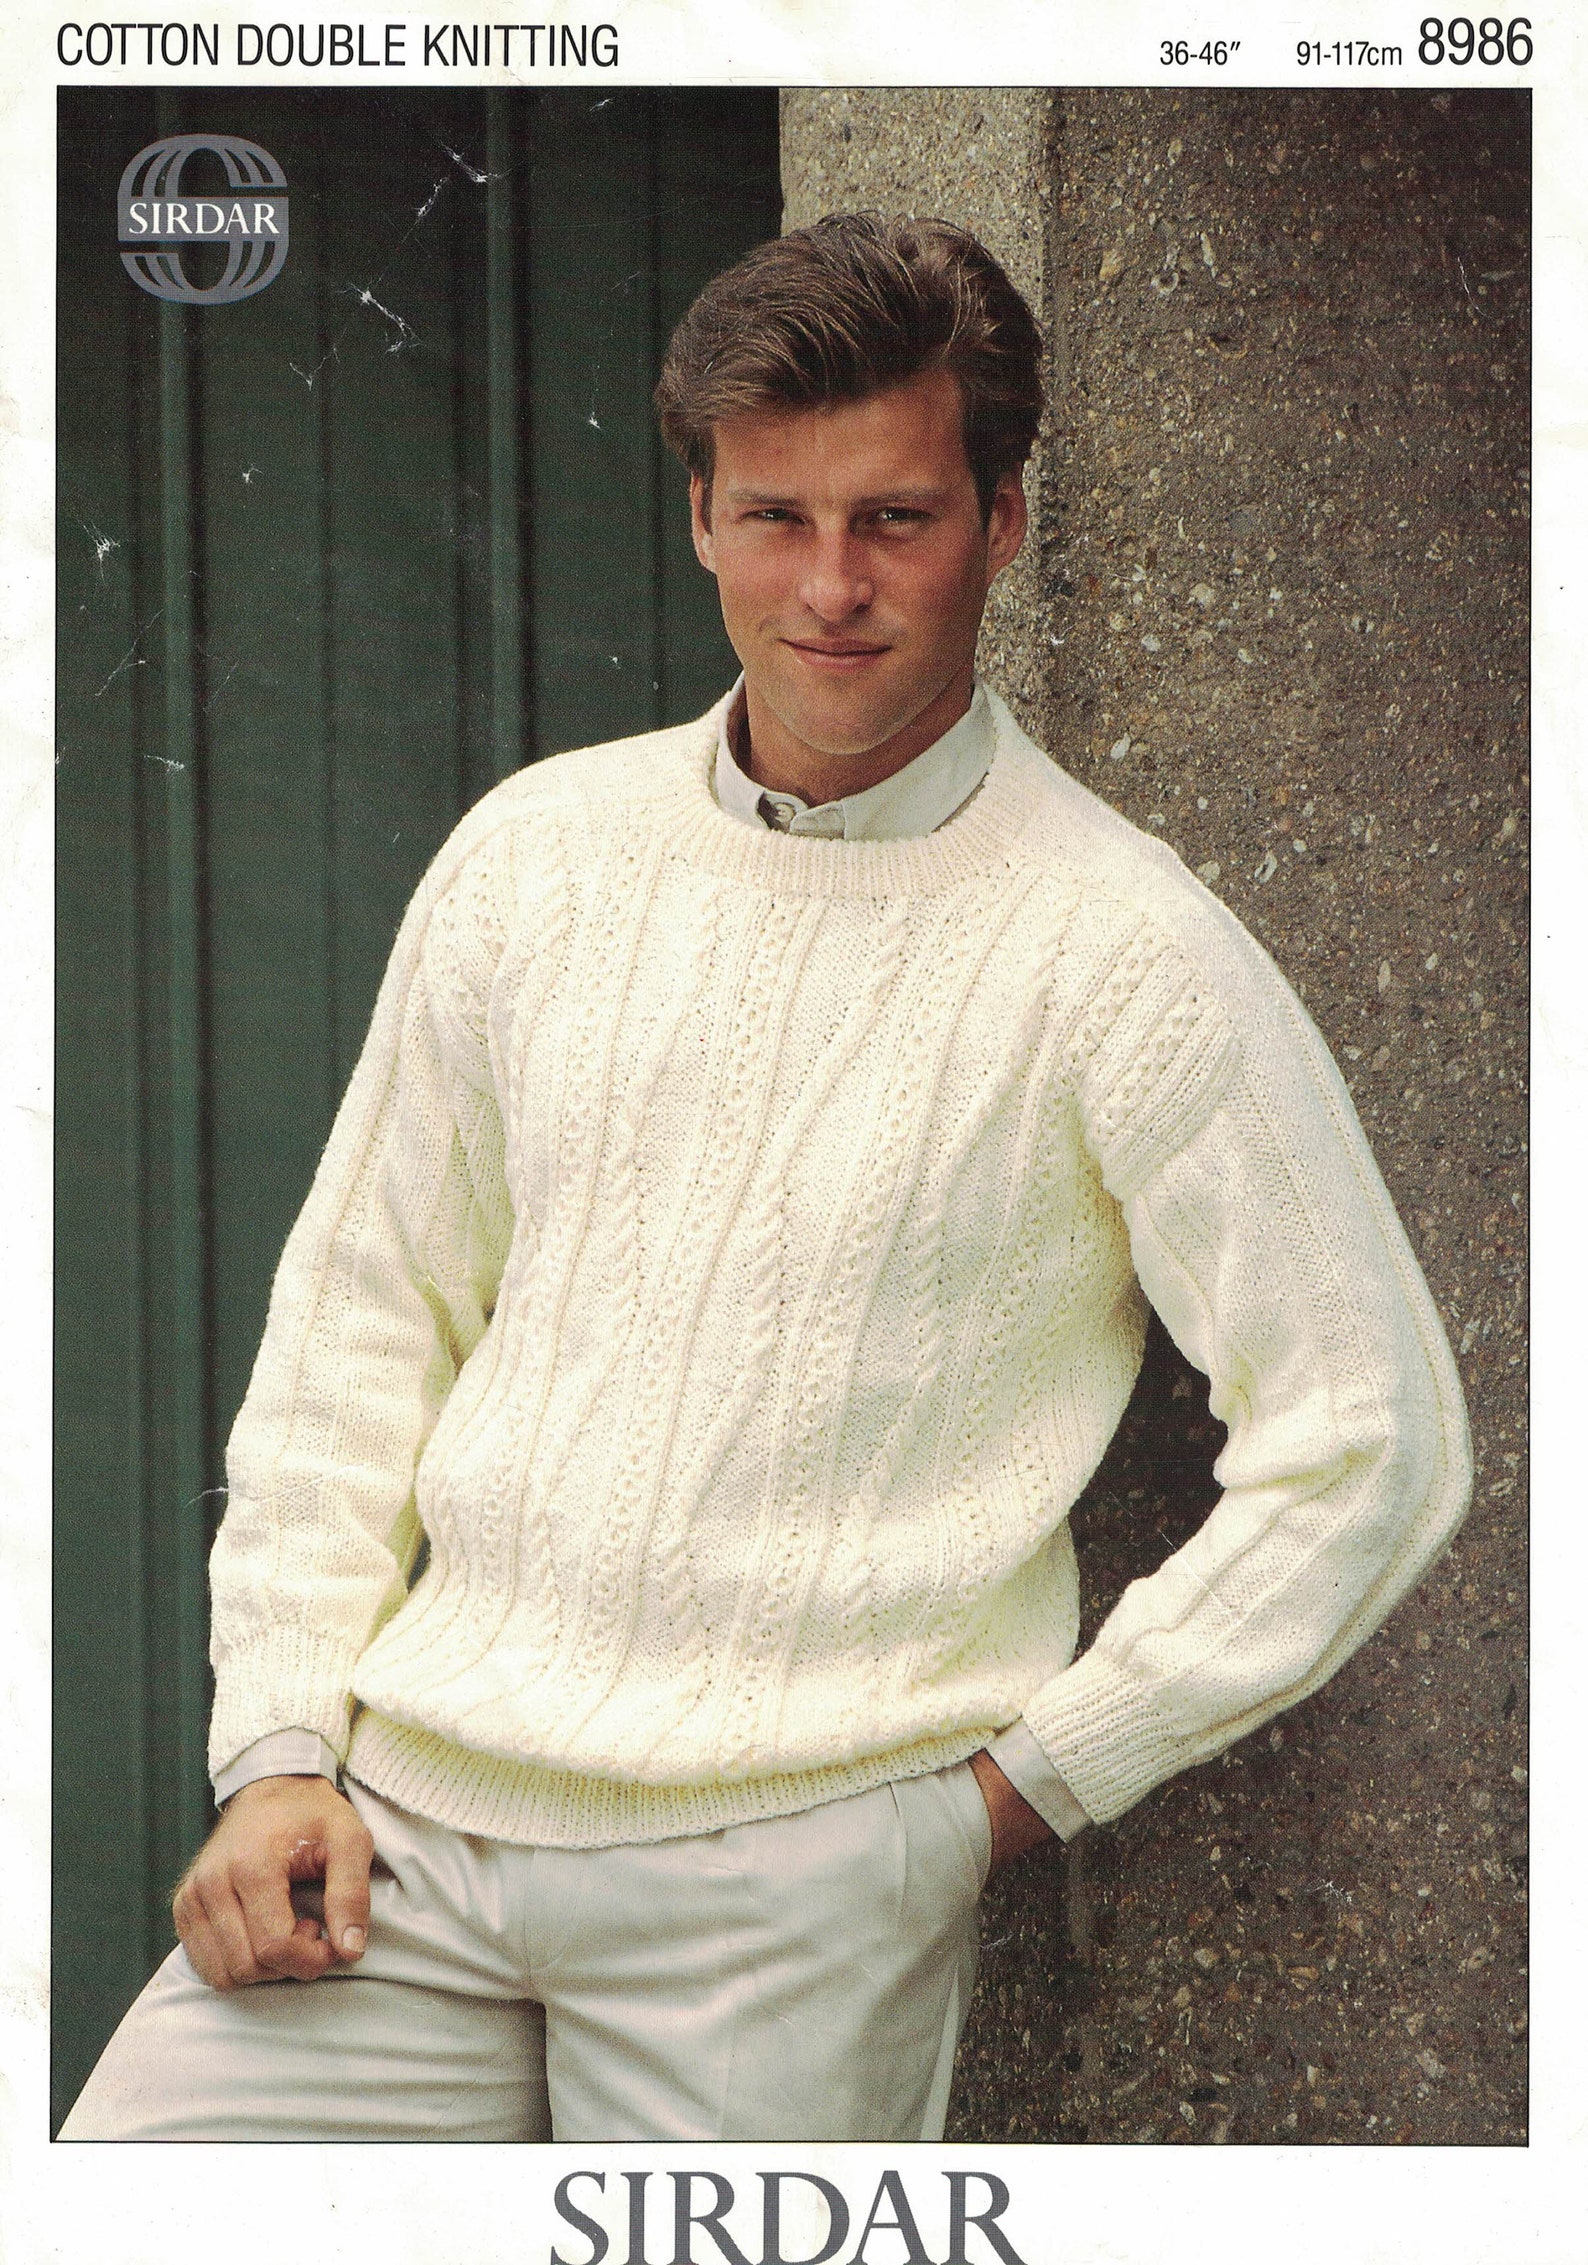 Vintage SIRDAR Knitting Pattern for a Mans Sweater No 8986 | Etsy